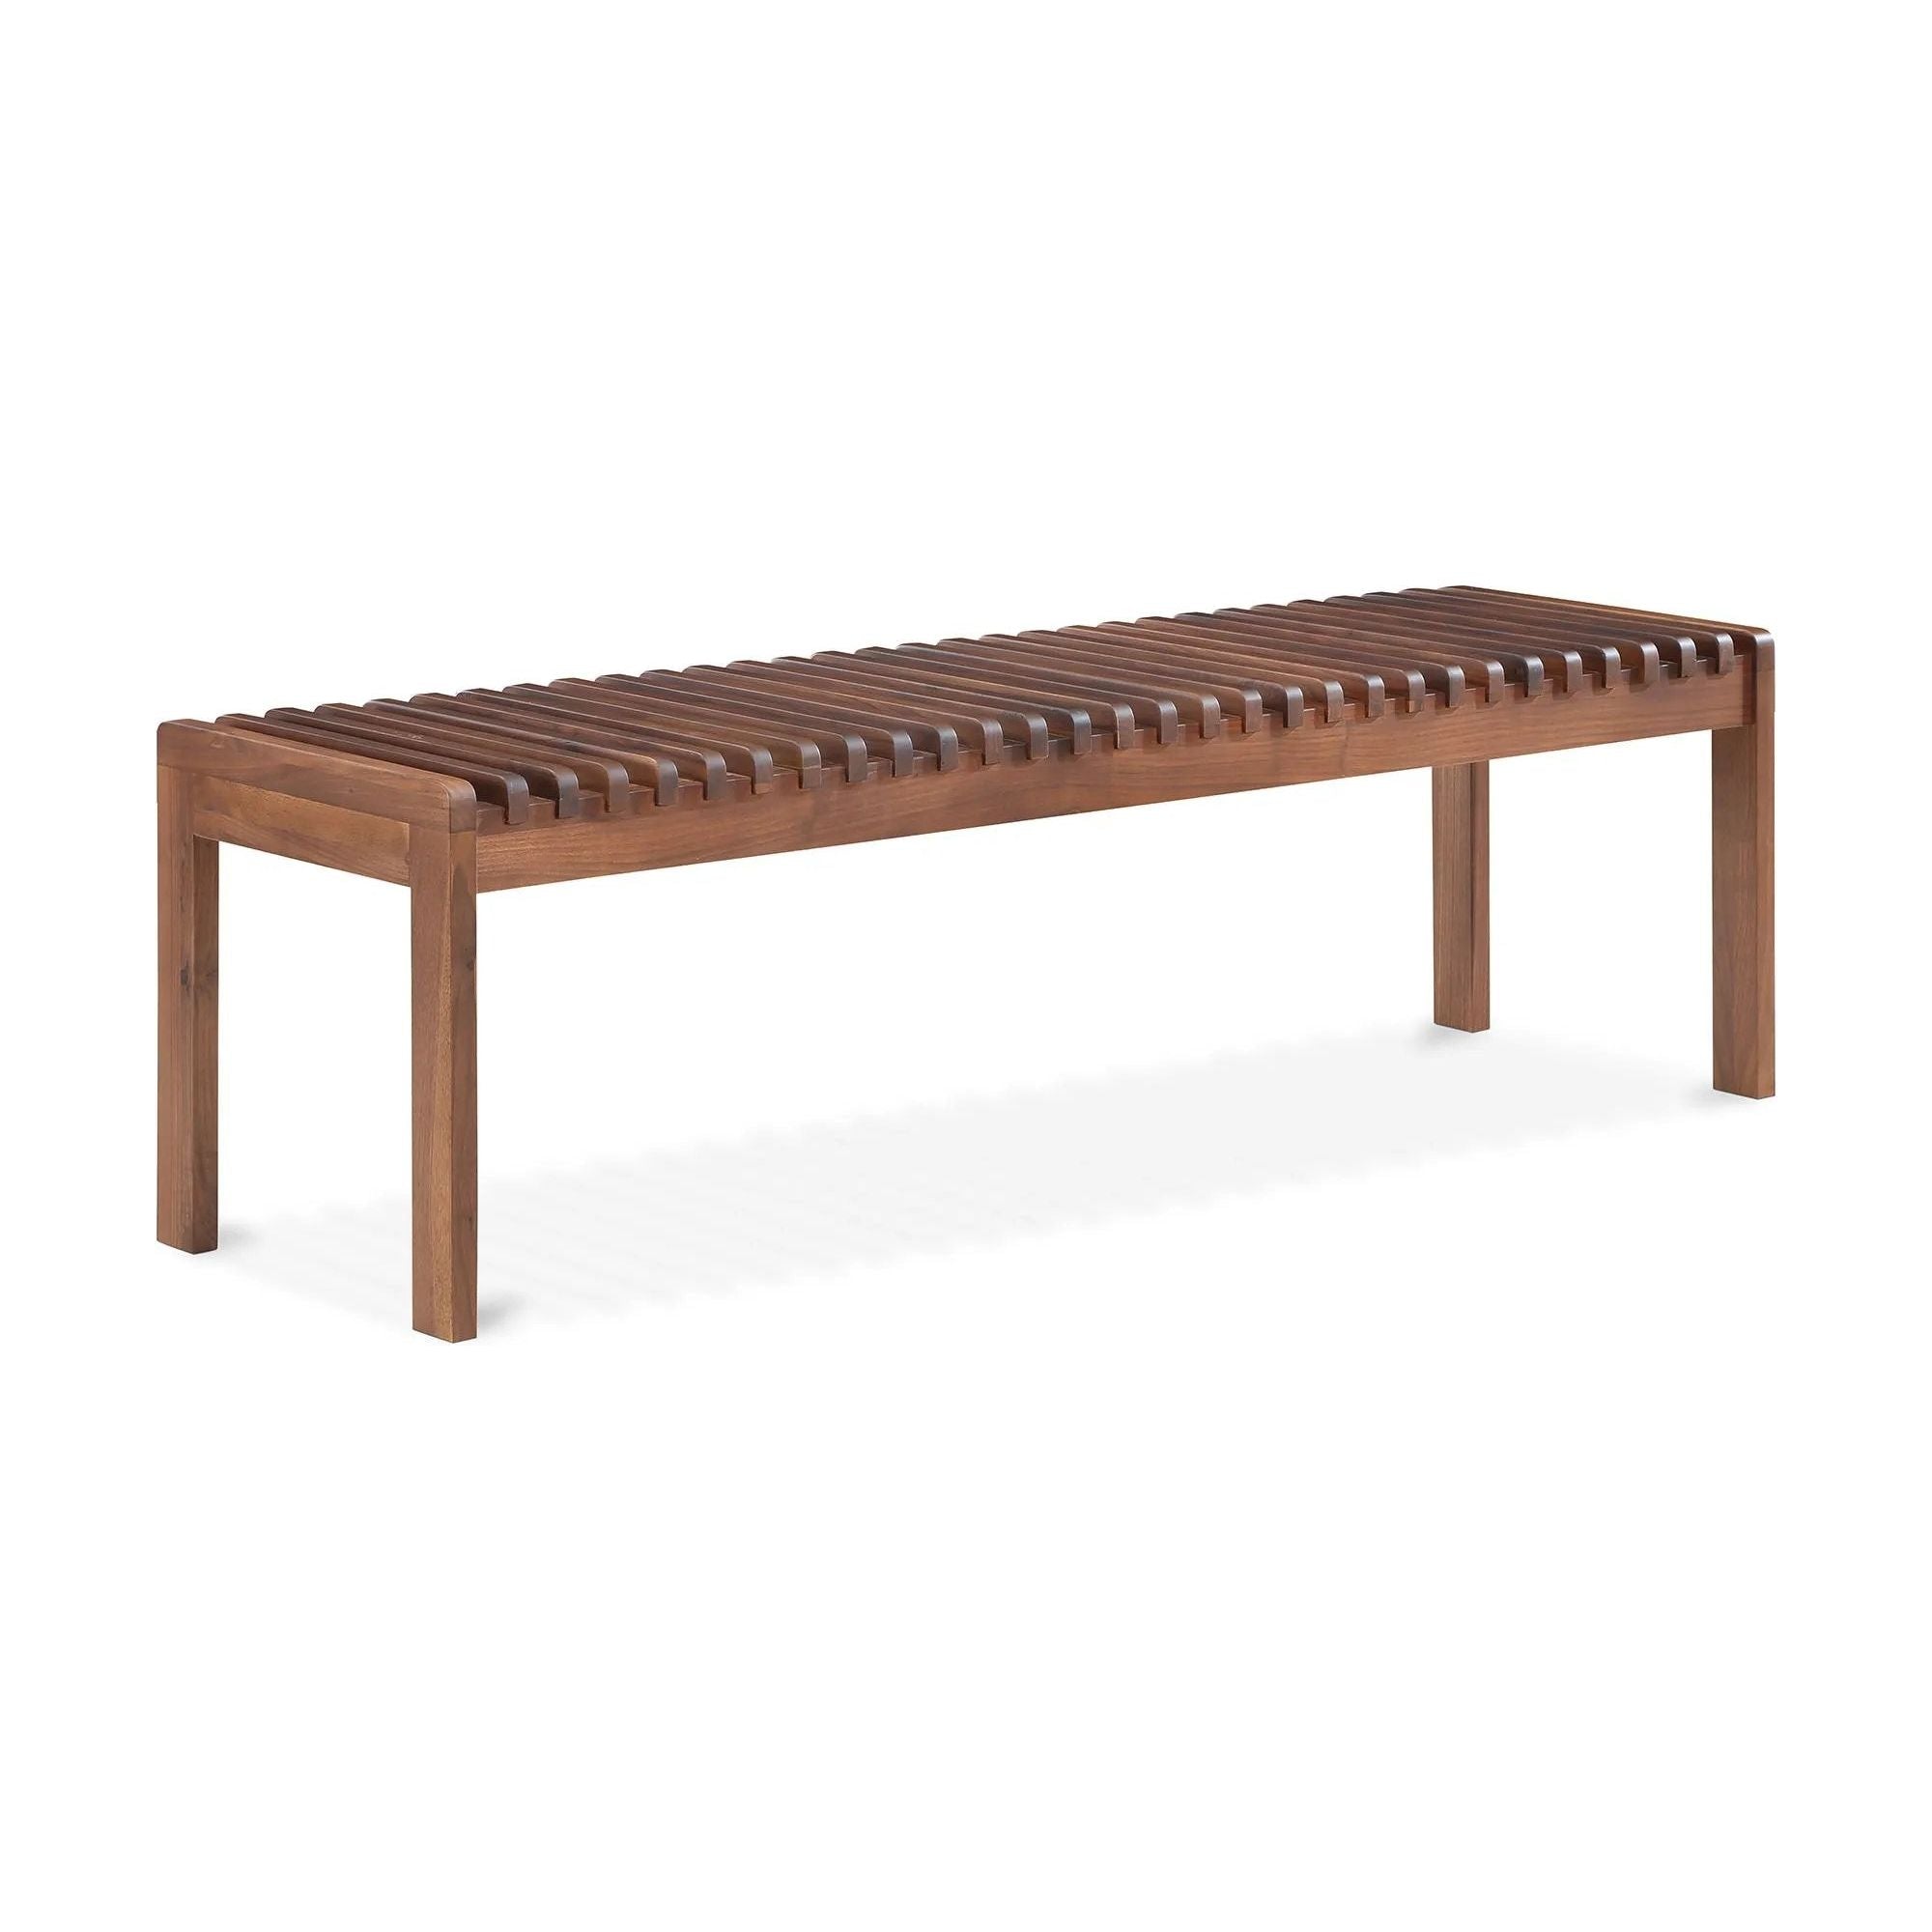 A pinch of panache with slat detailing, the solid wood Rohe bench is an ode to mid-century craftsmanship. A celebration of versatility, style this accent piece in the bedroom, dining room, living room, bathroom or entryway. Available in oak and walnut, Rohe adds natural allure to any space—this is visual styling made easy Amethyst Home provides interior design, new home construction design consulting, vintage area rugs, and lighting in the Omaha metro area.